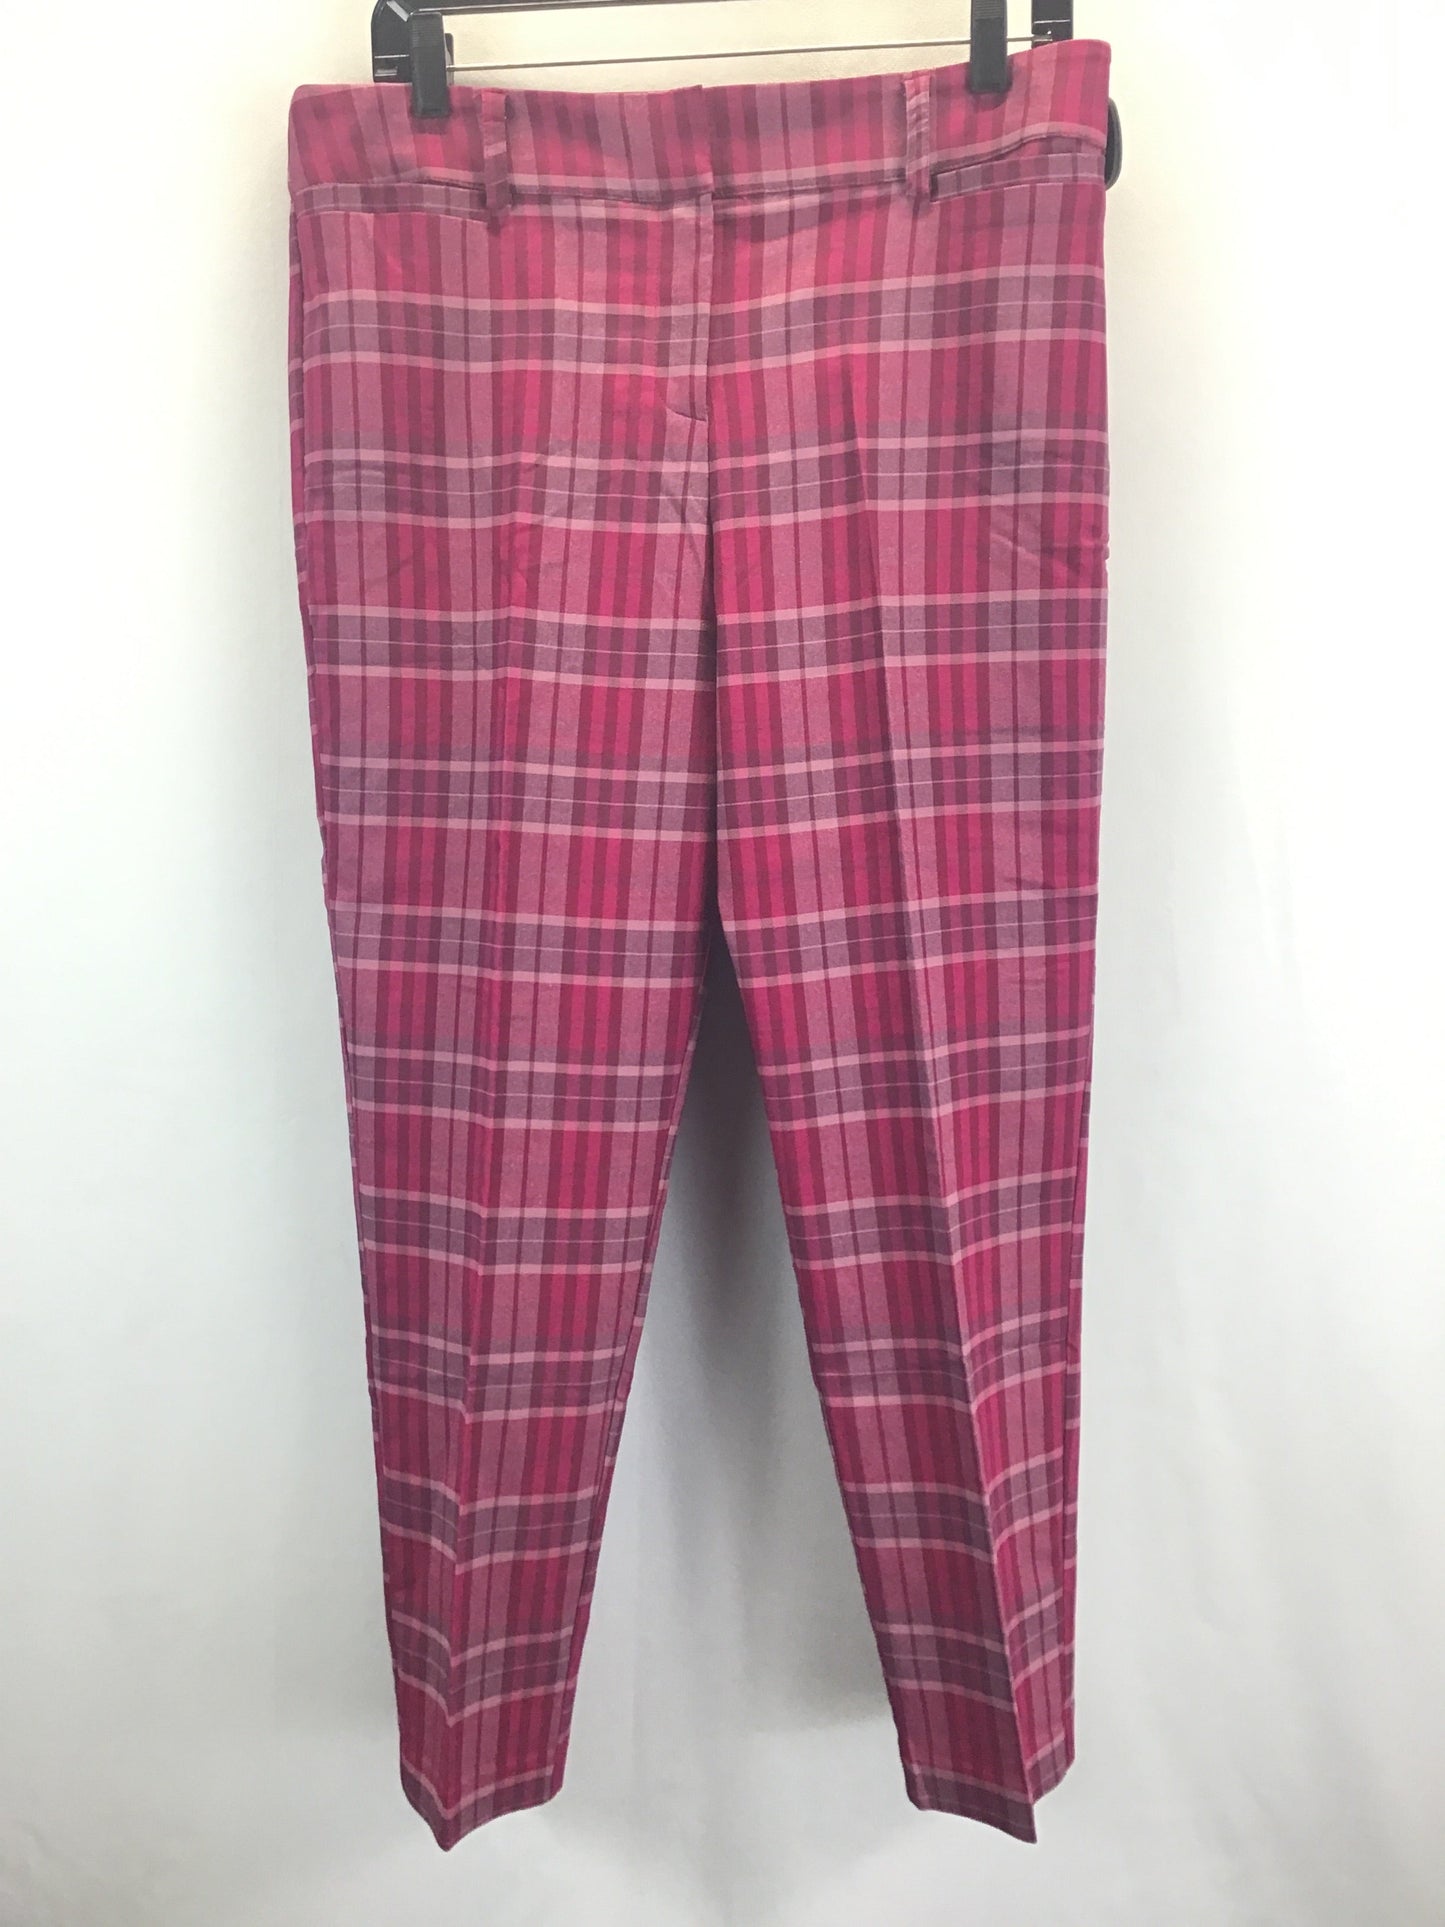 Plaid Pattern Pants Cropped New York And Co, Size 10